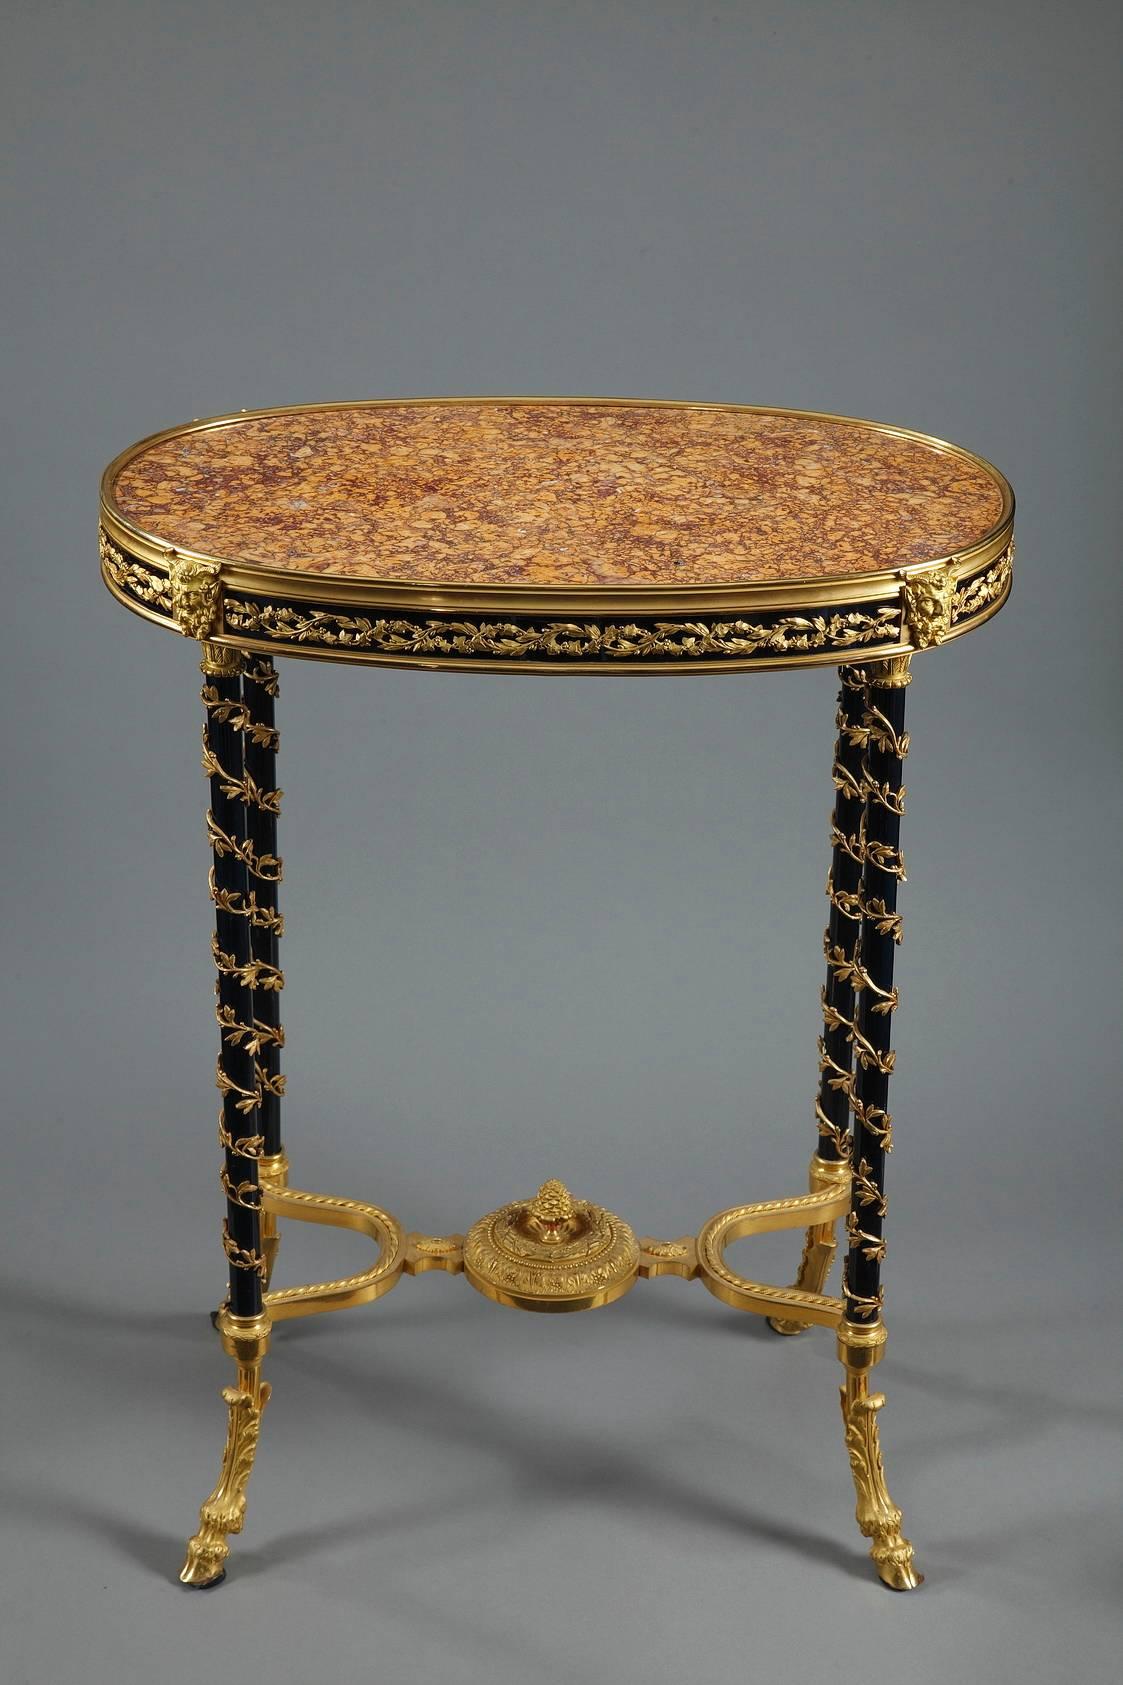 Oval gueridon featuring a marble top. The purple brocatelle marble originates from Spain and is ringed by a gilt bronze rim decorated with intertwined foliage on a dark blue background. Satyr heads are placed at the top of each of the slender table